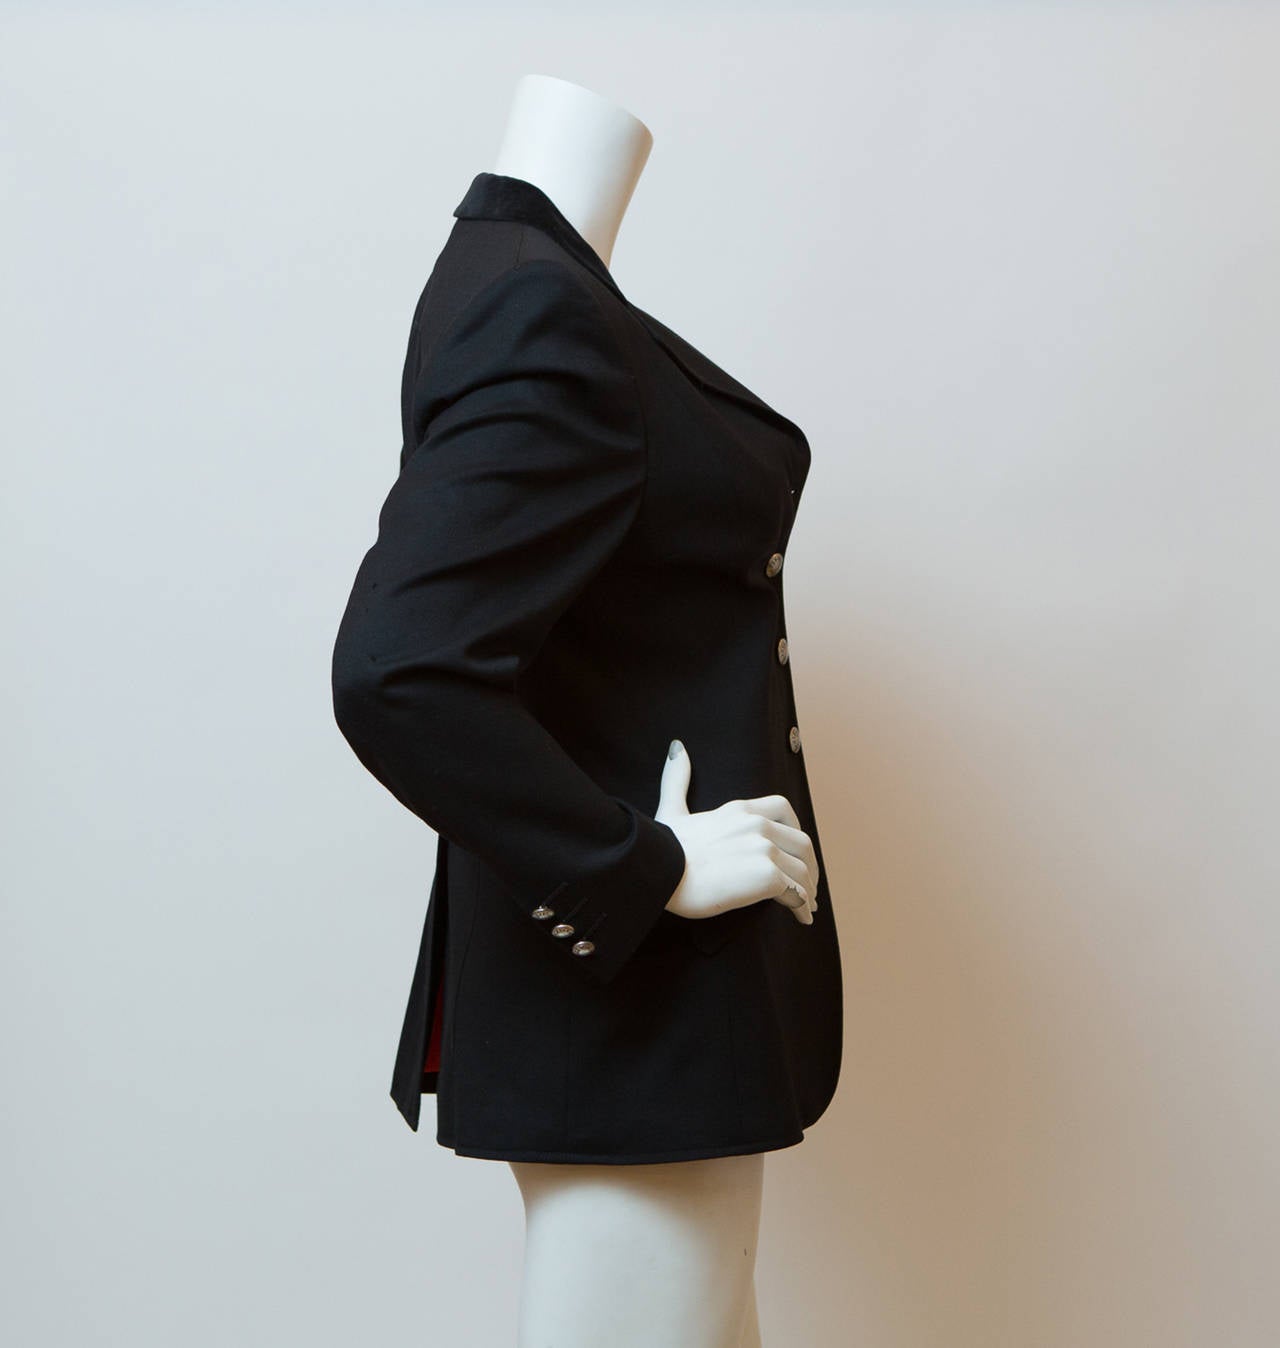 Hermes vintage black riding coat style single breasted blazer with velvet collar and silver button details, with red silk lining.